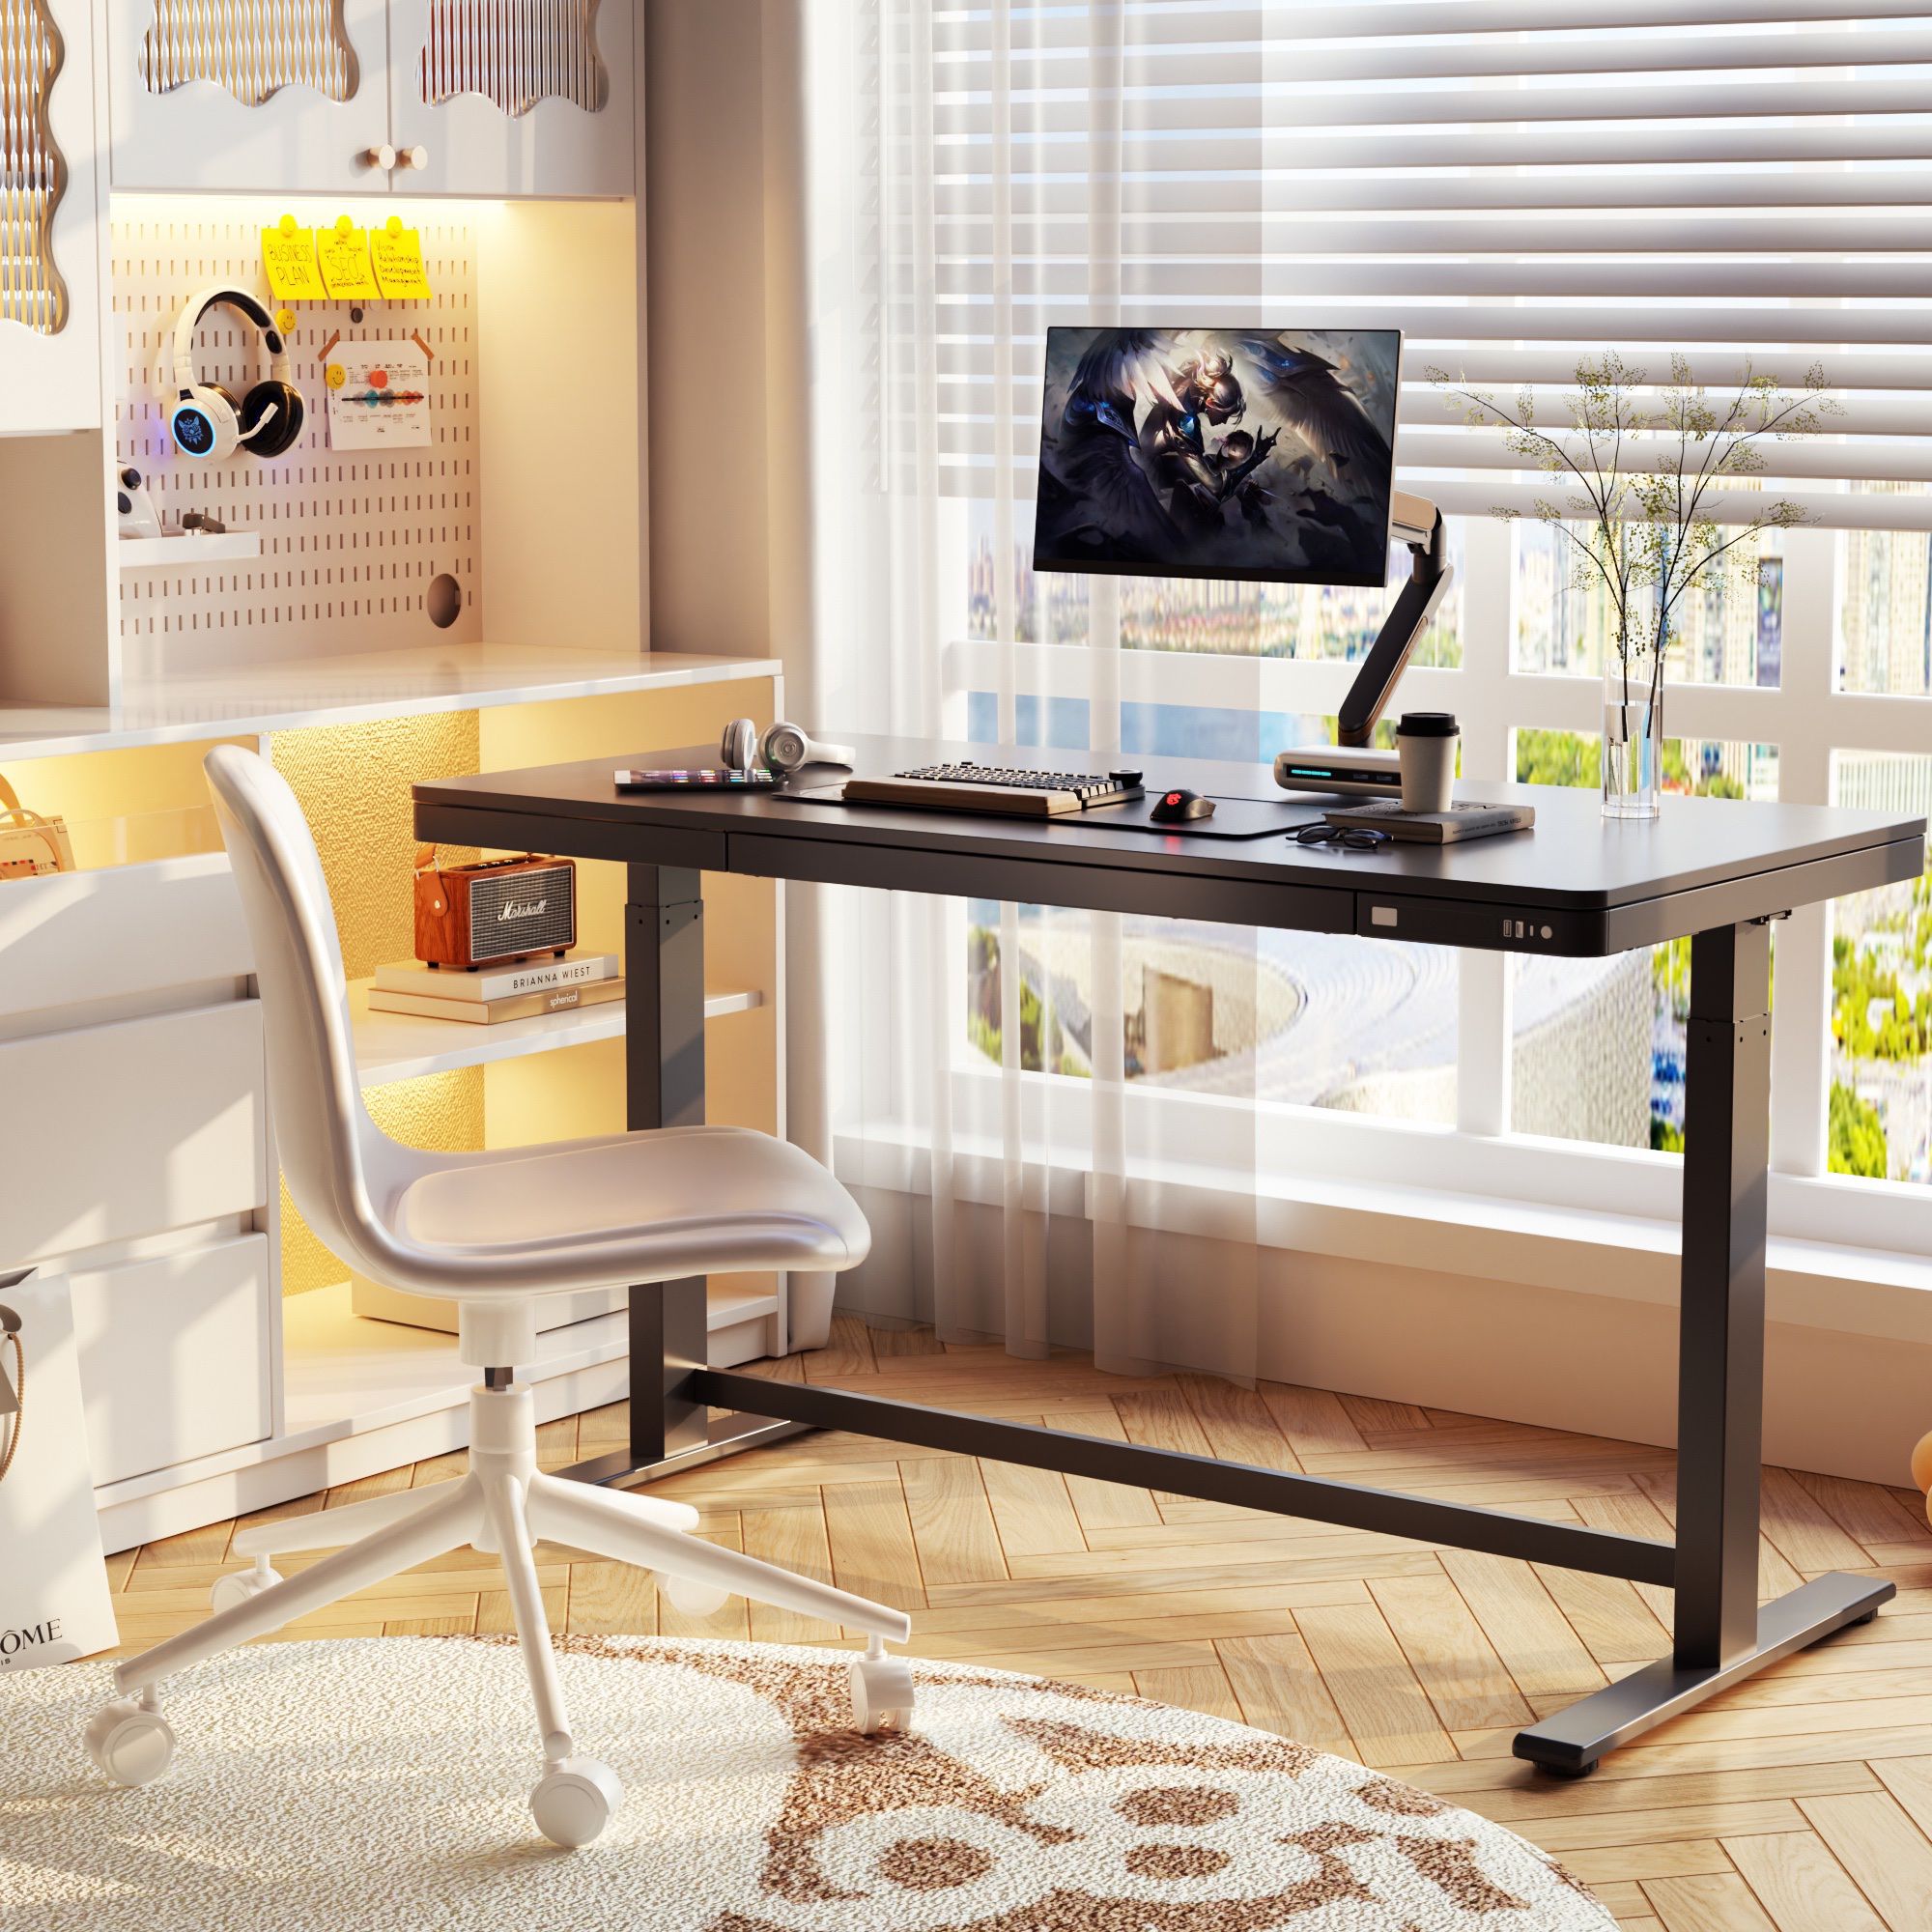 NEW 55” Black Electric Standing Desk with Drawer, Charging Ports, Height Adjustable Office Desk